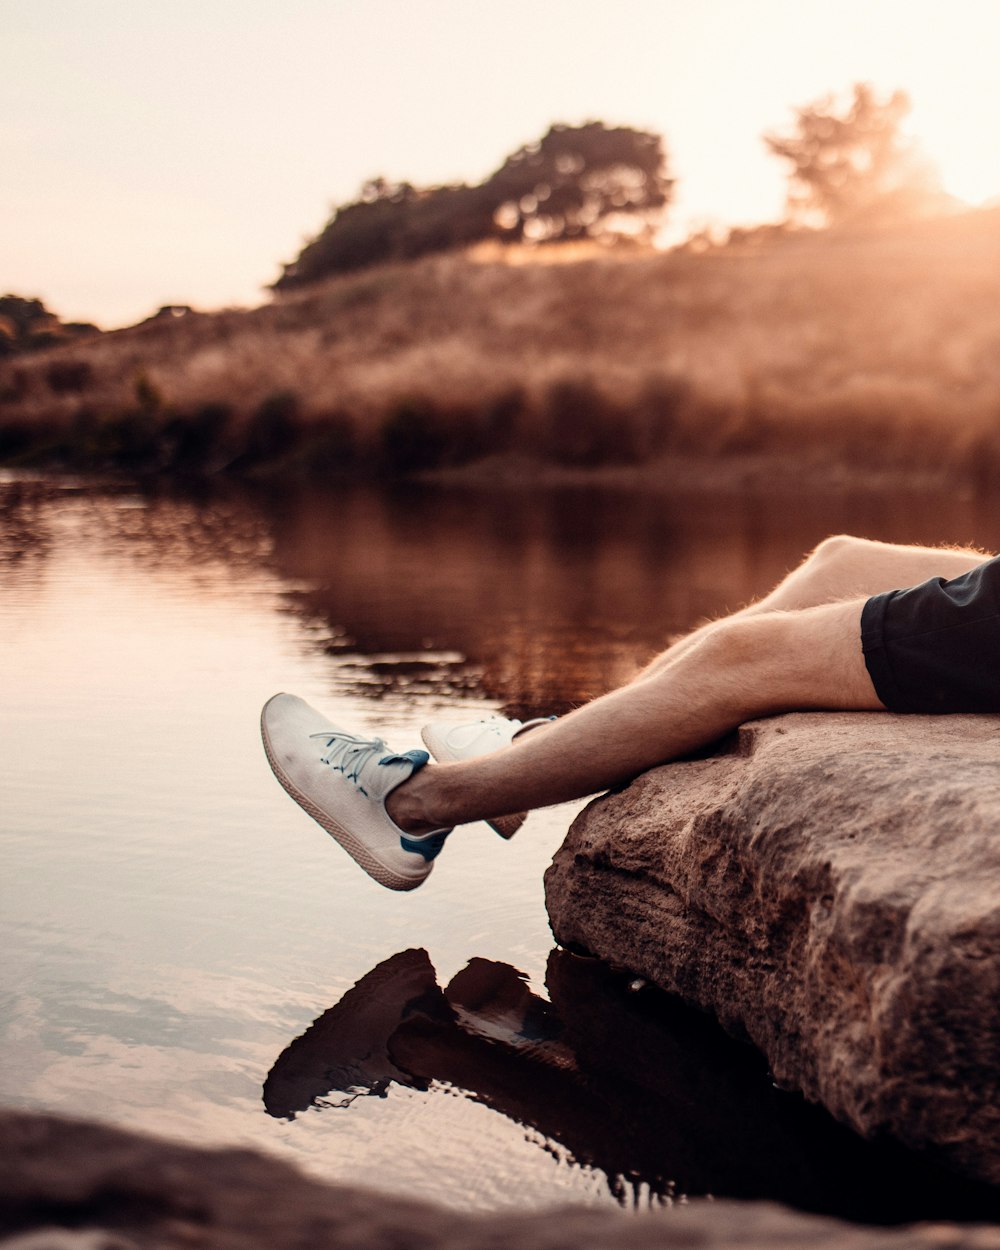 person wearing white sneakers sitting on brown rock near body of water during sunset